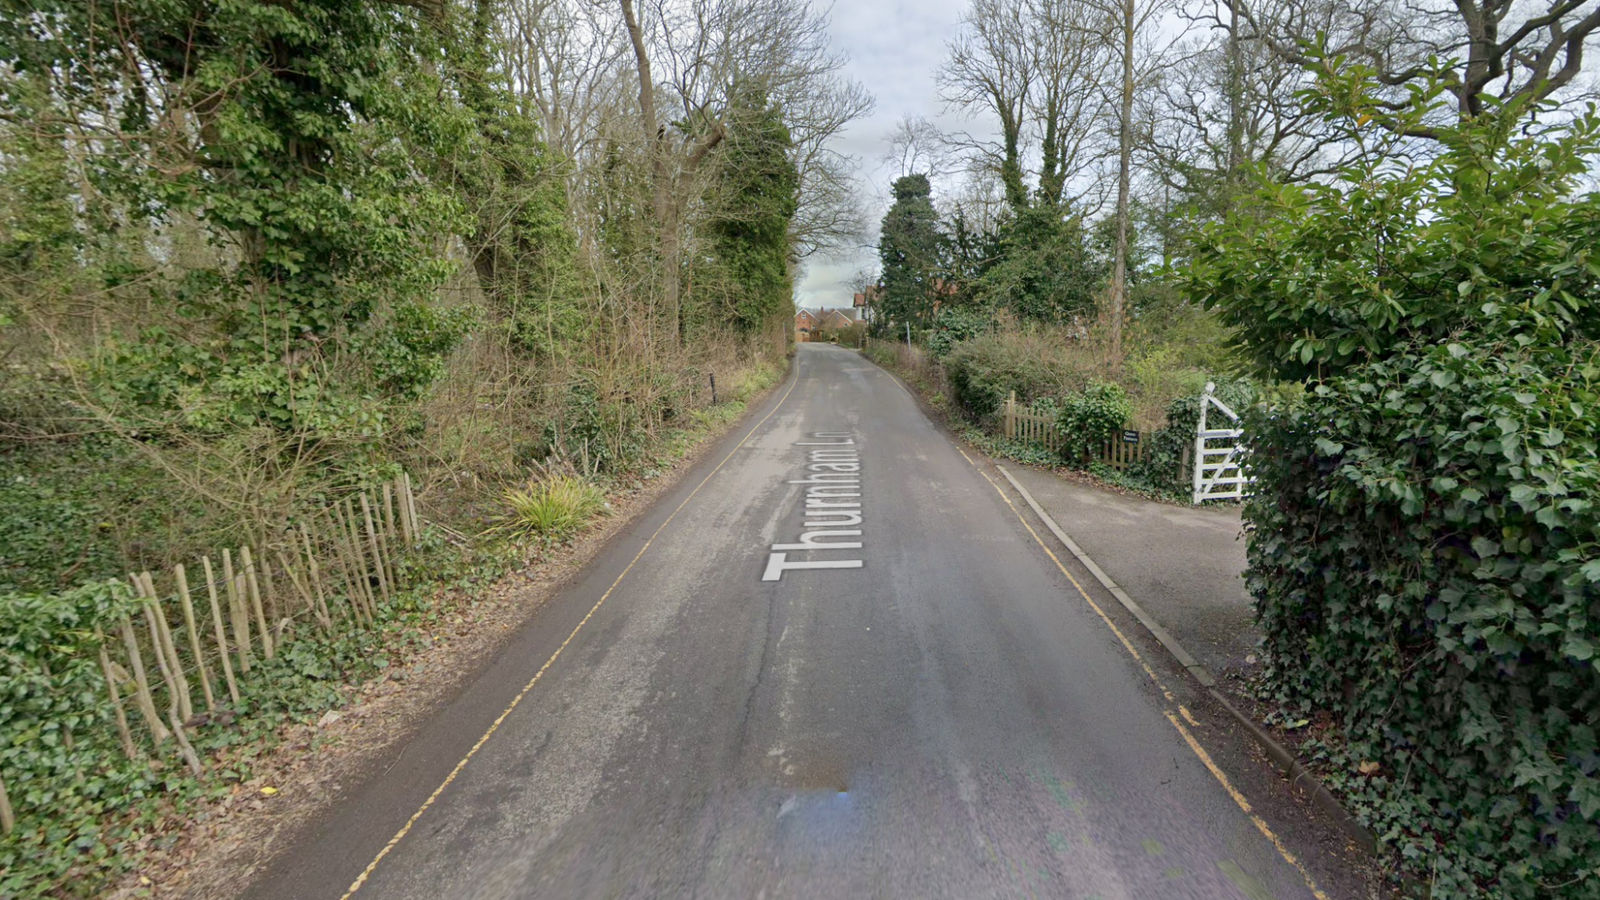 Dog walkers and pet killed after being hit by BMW in Maidstone